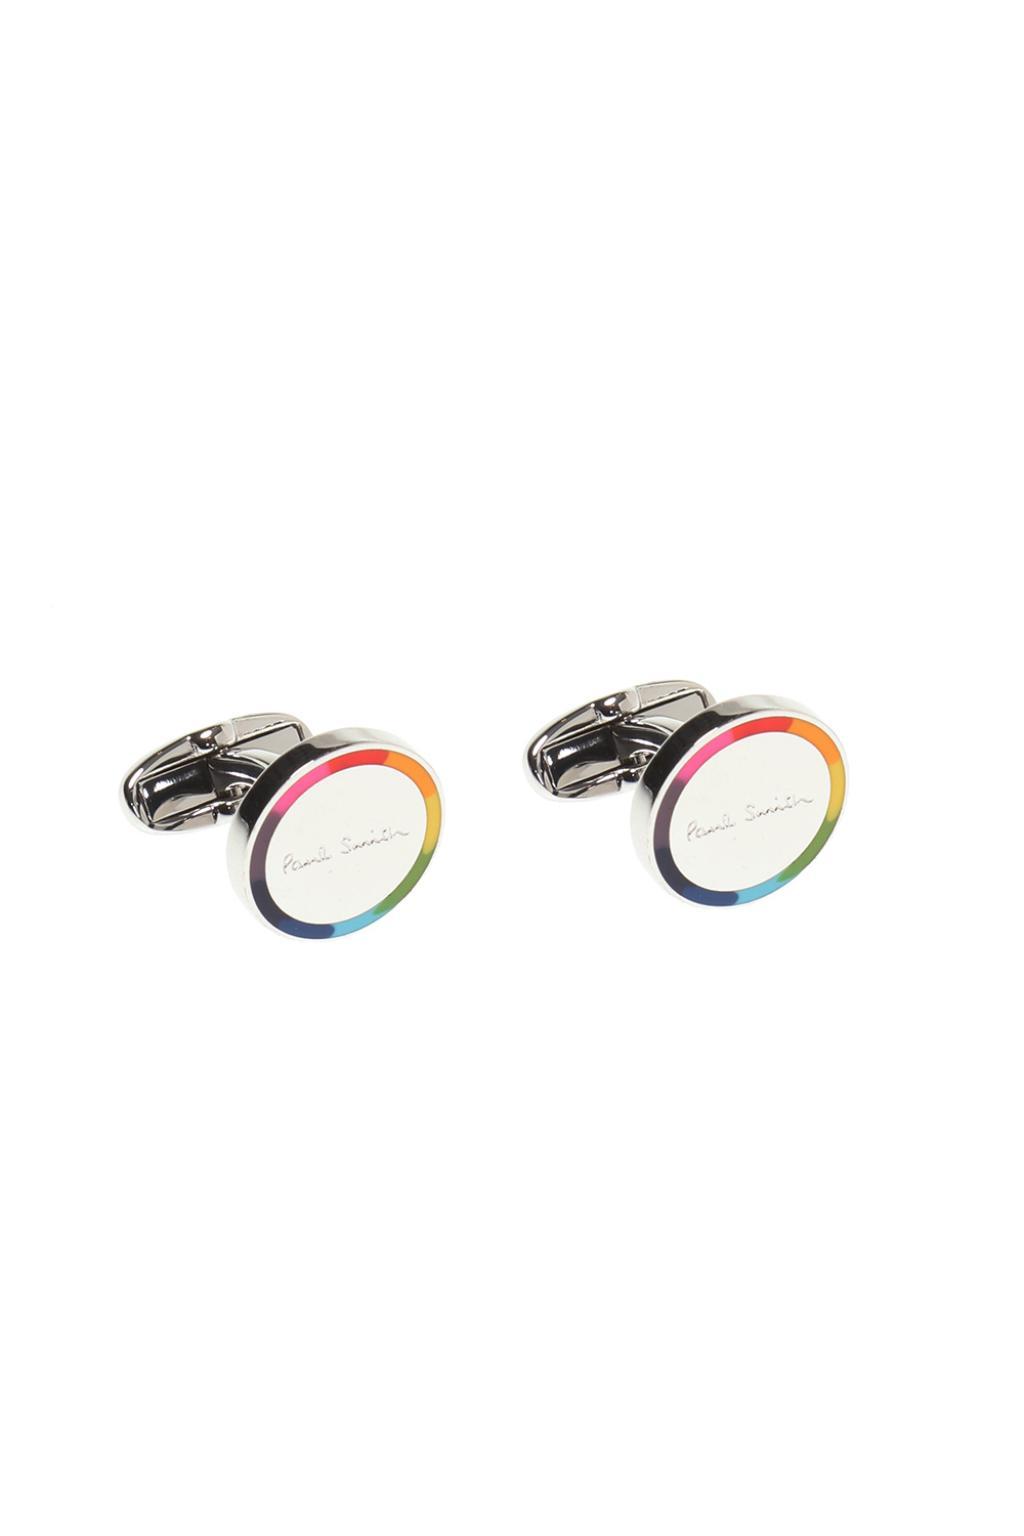 Paul Smith Silver And Multicolor Logo Cufflinks in Metallic for Men - Save 59% - Lyst